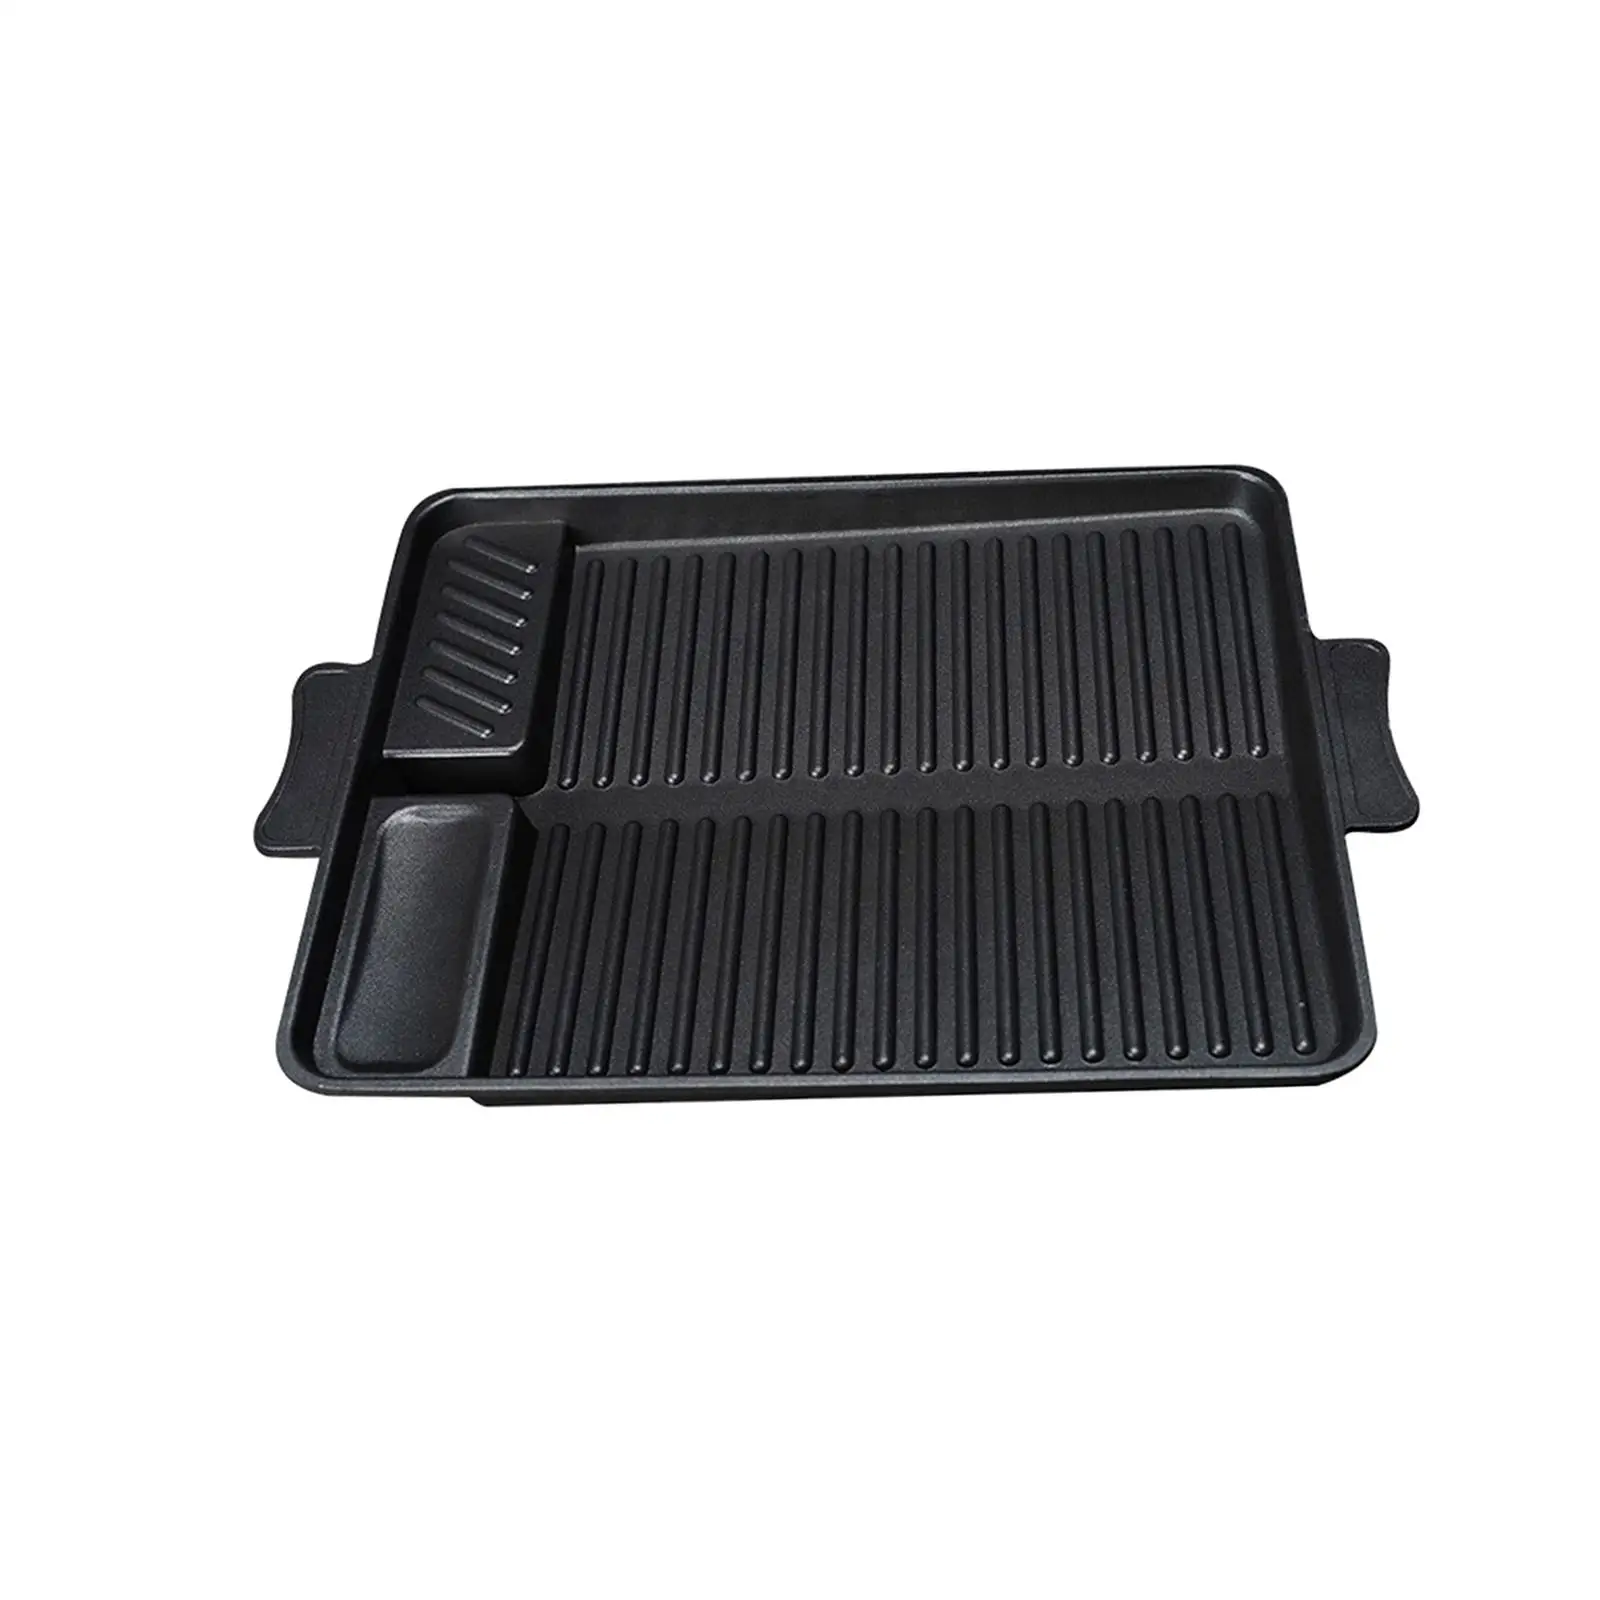 Aluminum Alloy Grill Pan Griddle Plate Meat Steak Grill tray Nonstick Home Kitchen with Handle for Barbecue Outdoor